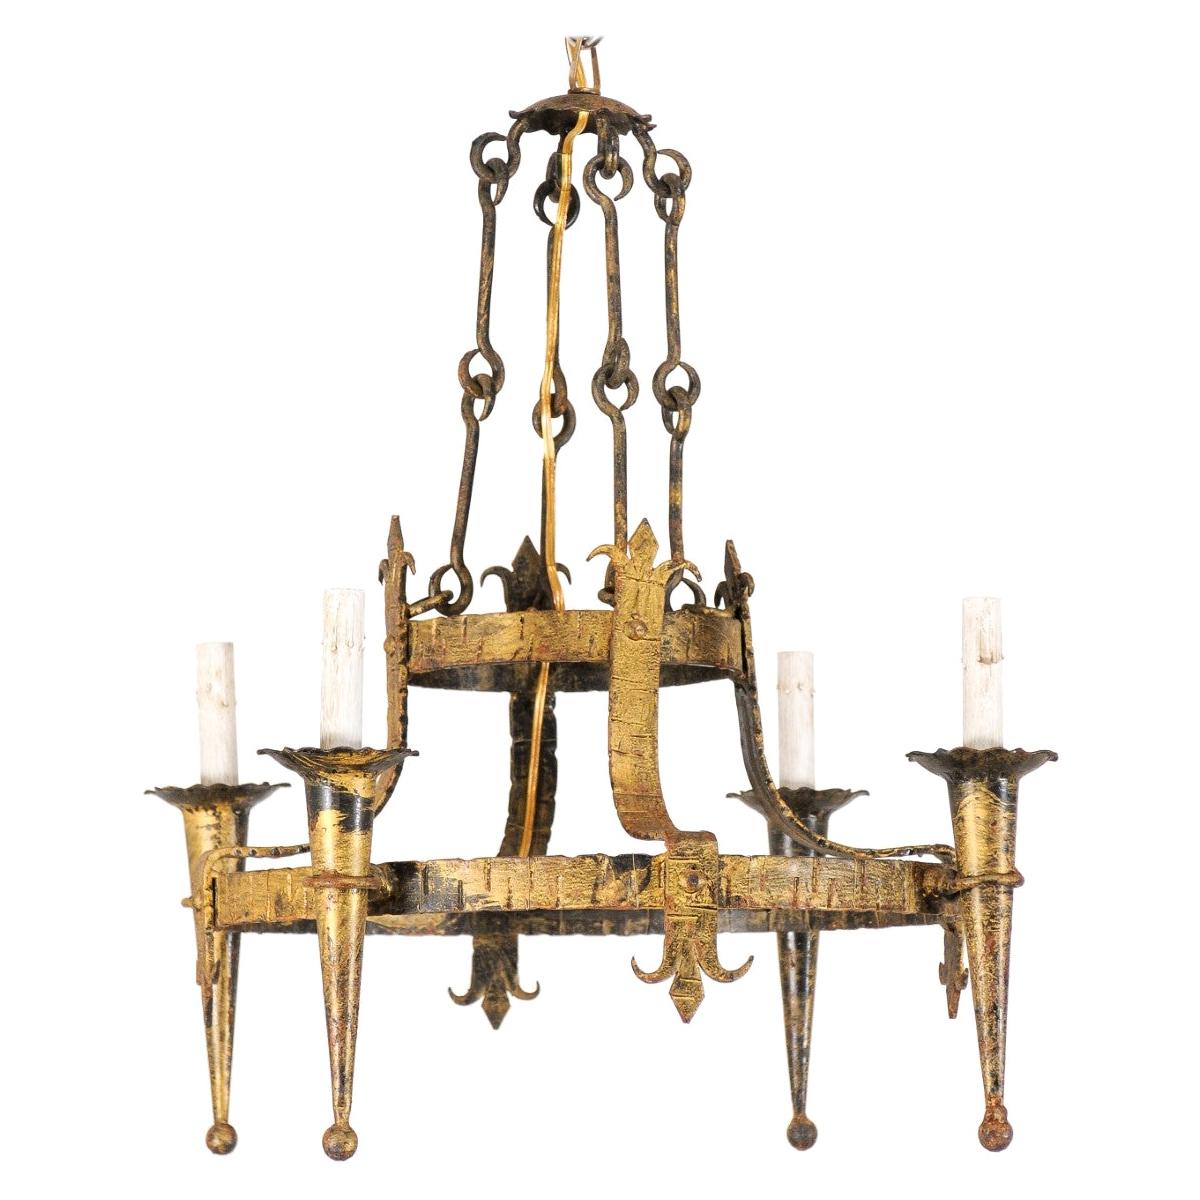 French Tiered-Ring Gilt Iron Chandelier, Fleur di Lys Motif For Sale